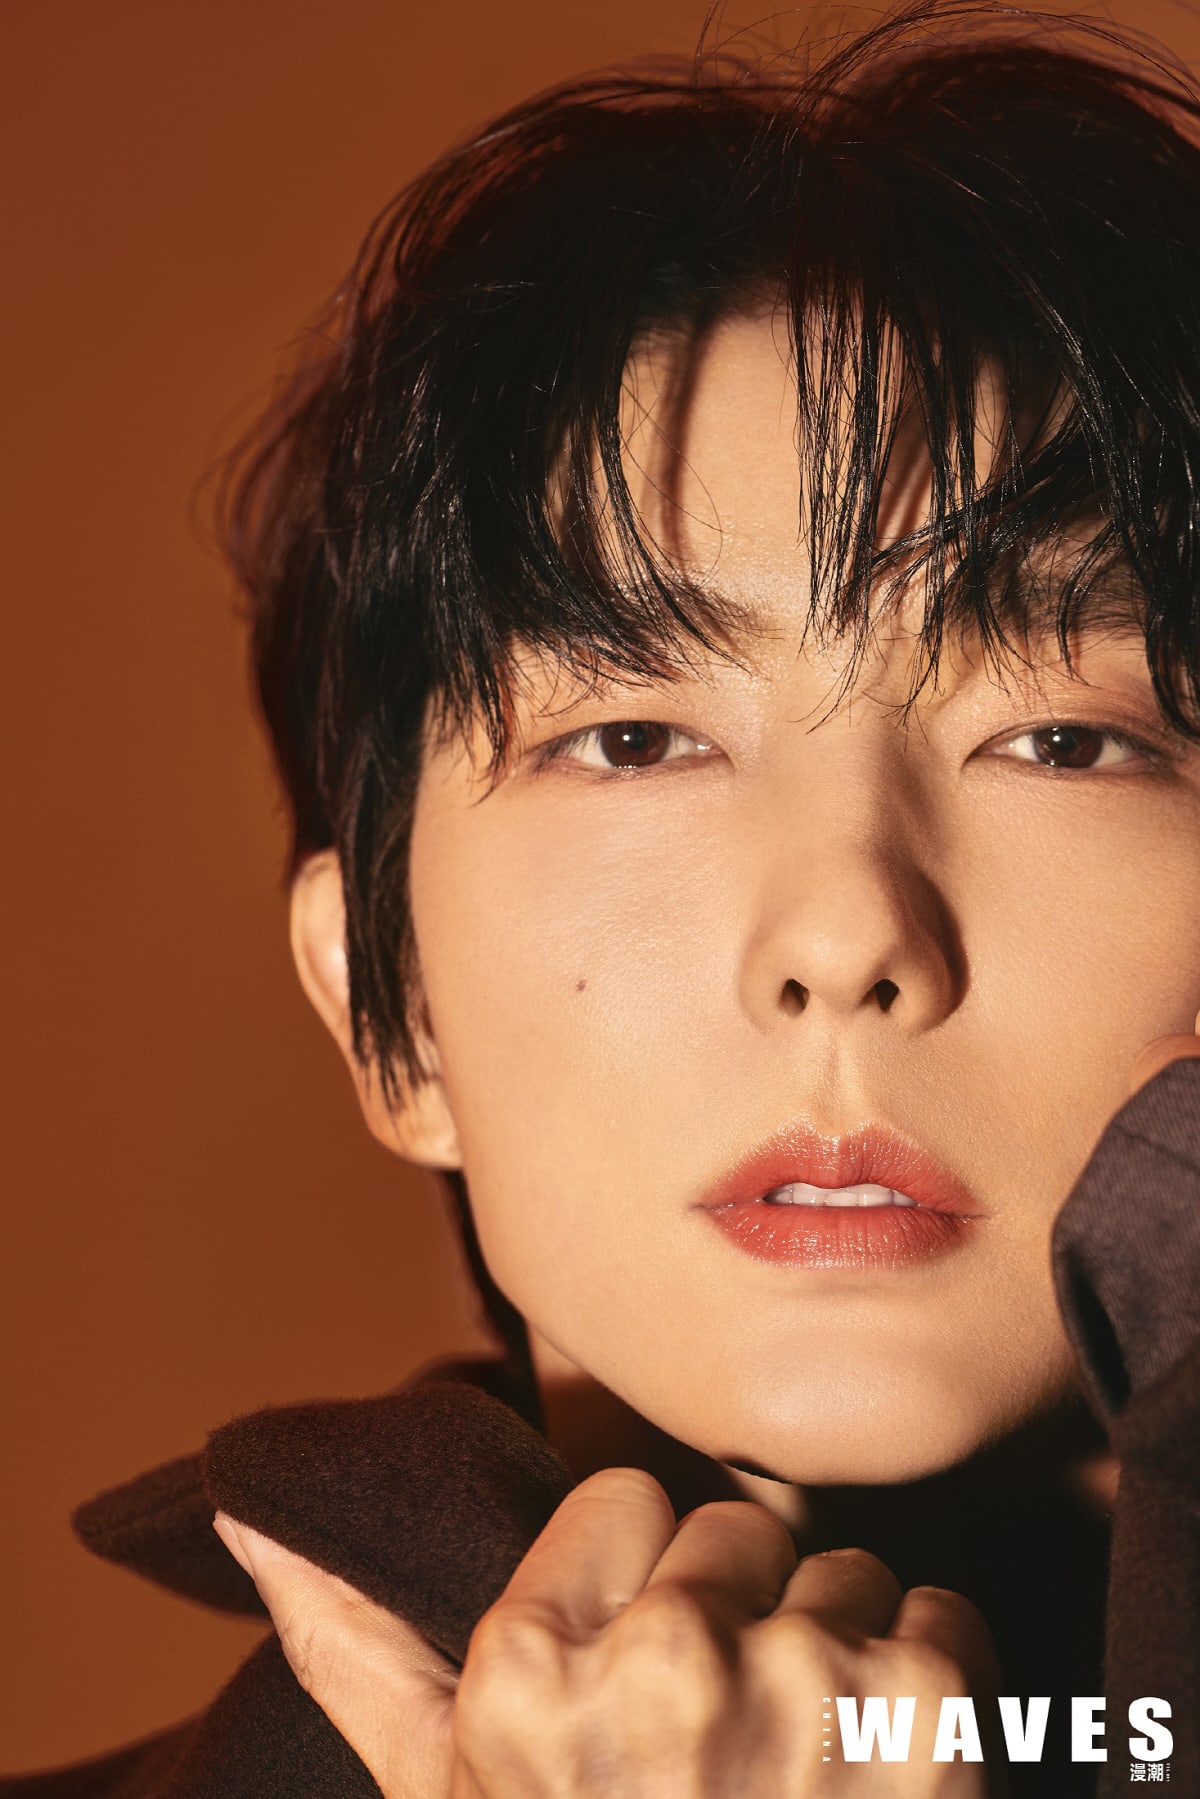 lee-joon-gi-talks-about-selecting-his-next-project-and-more-1